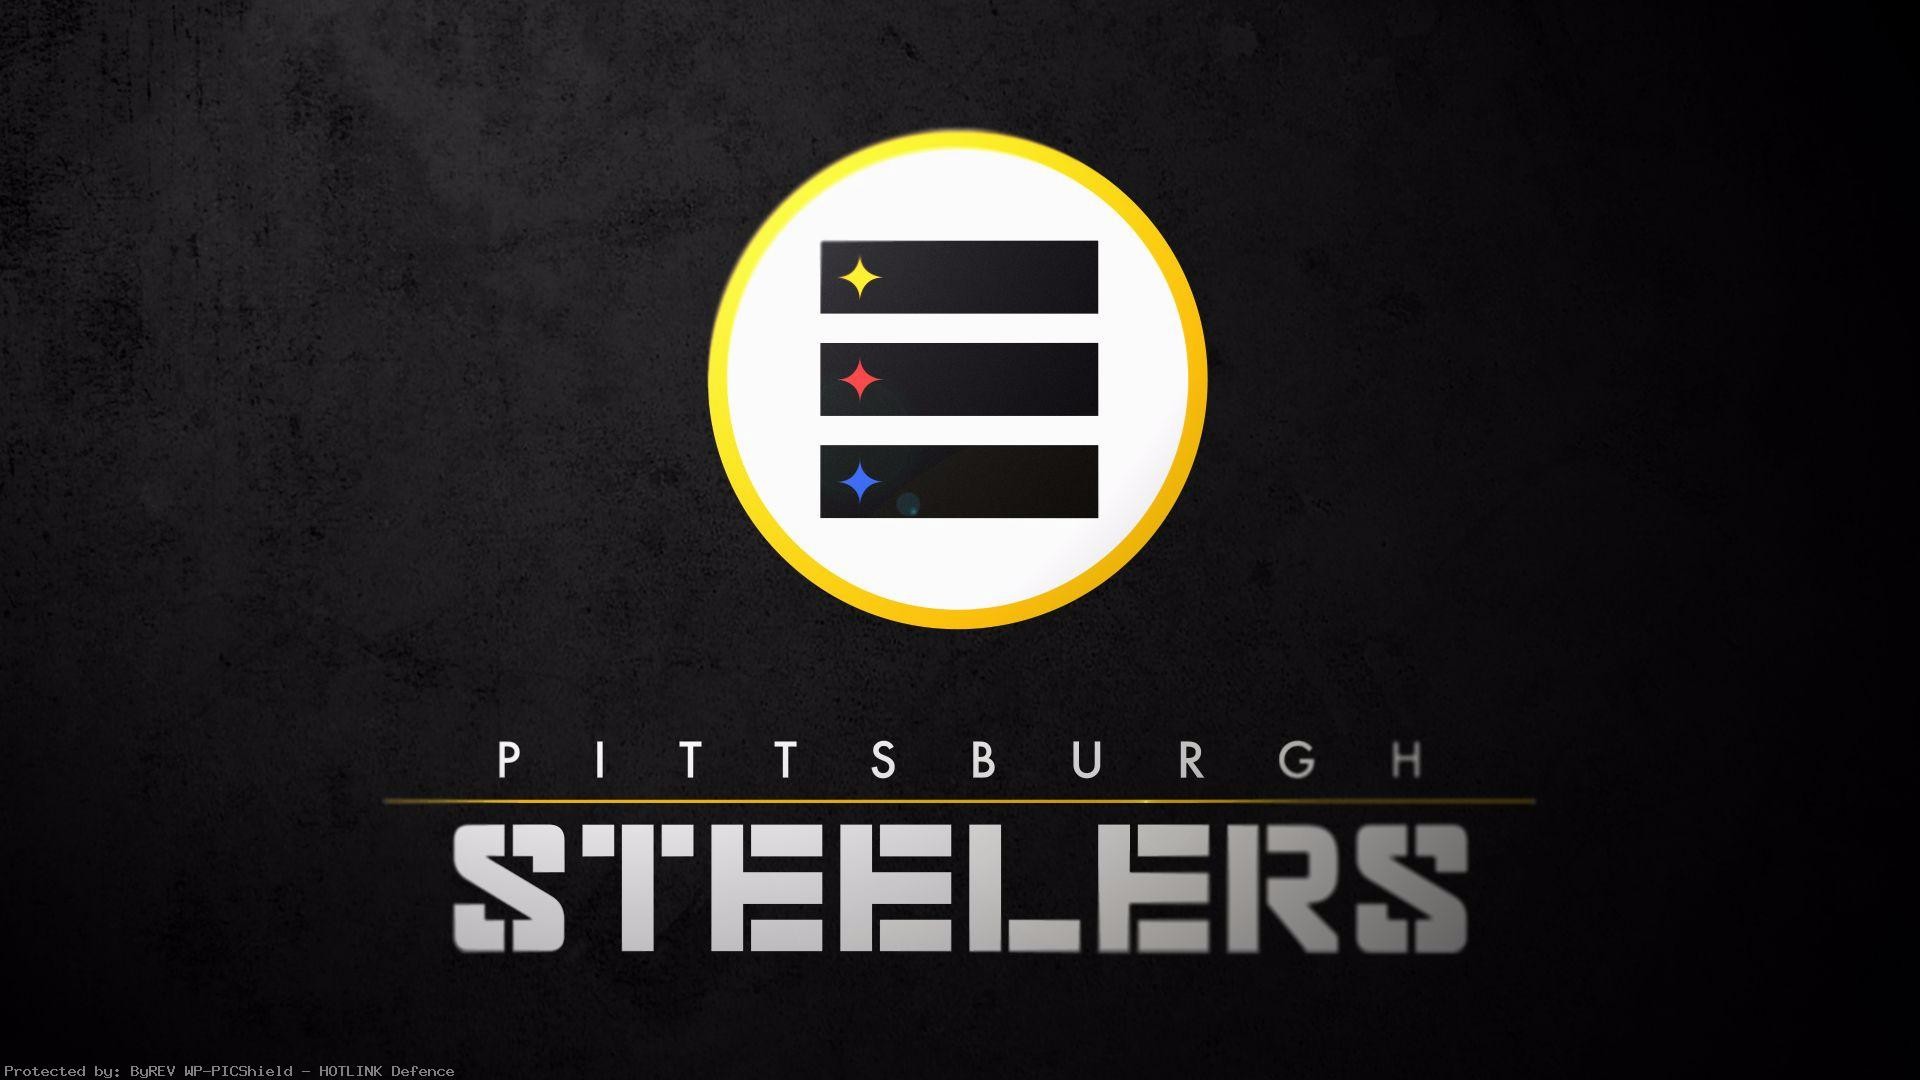 1920x1080 Steelers-Cell-Phone-1920%C3%97-Steelers-Adorable-